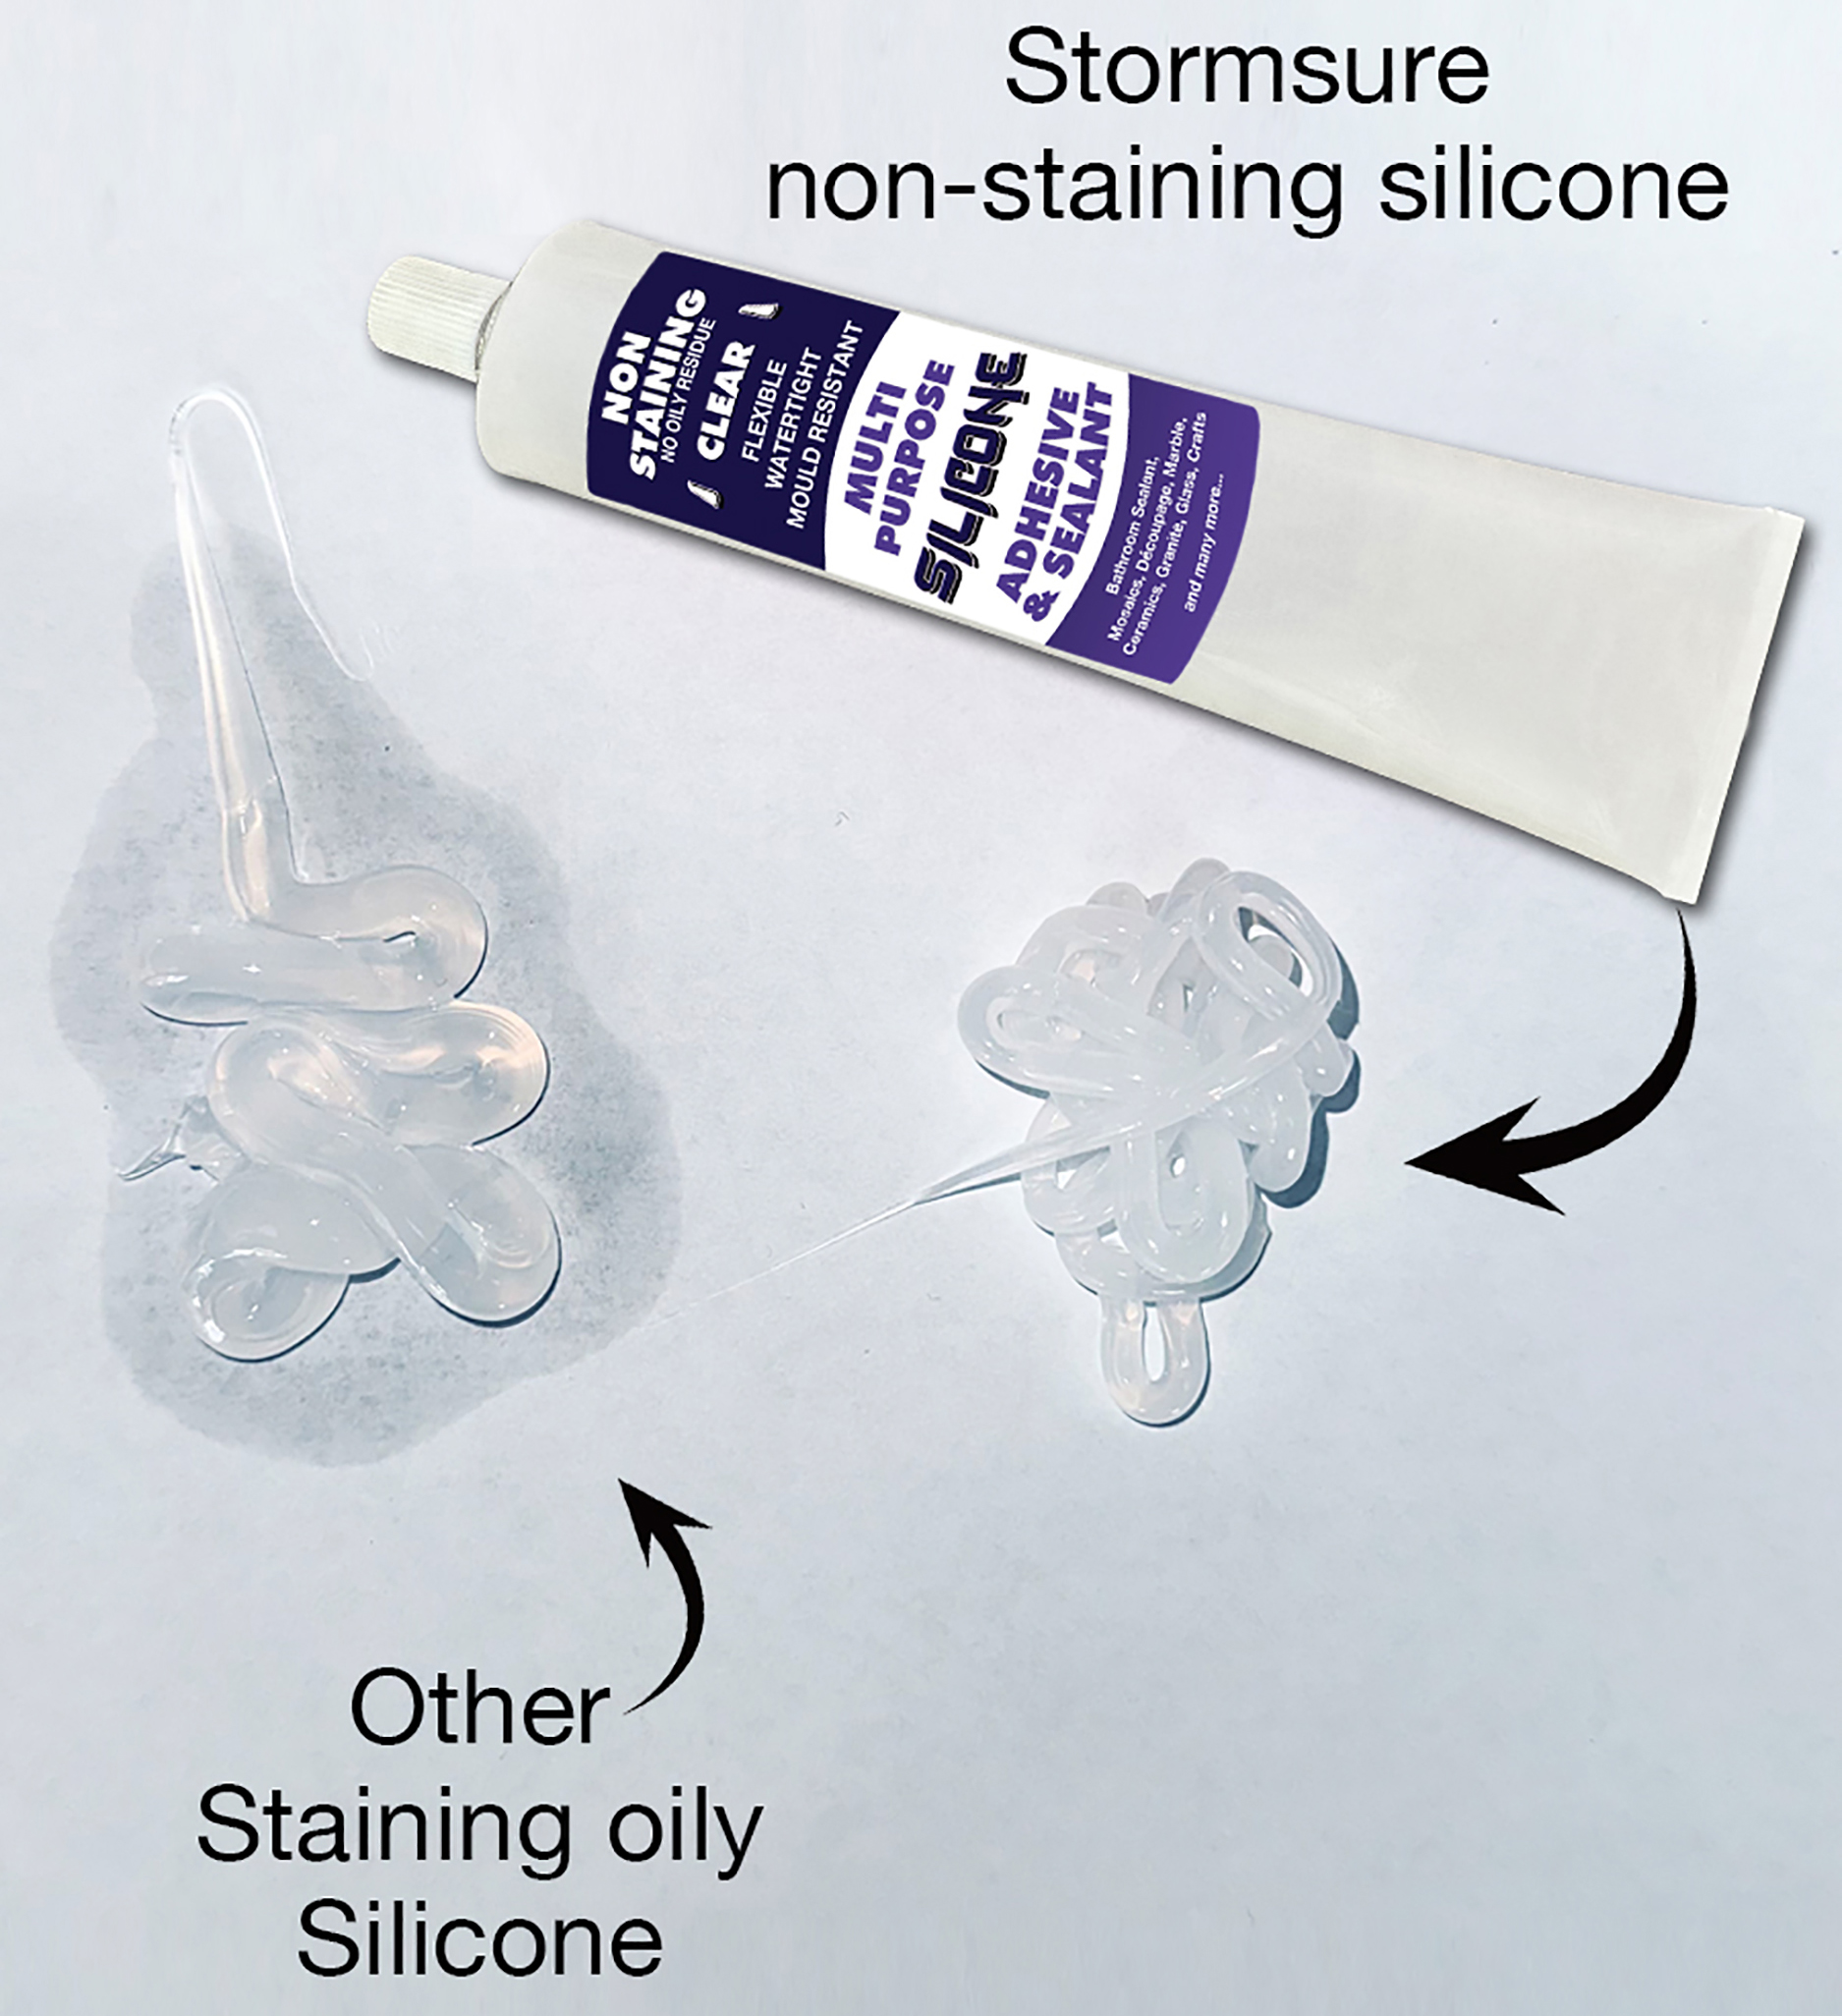 Non-Staining Silicone Adhesive and Sealant